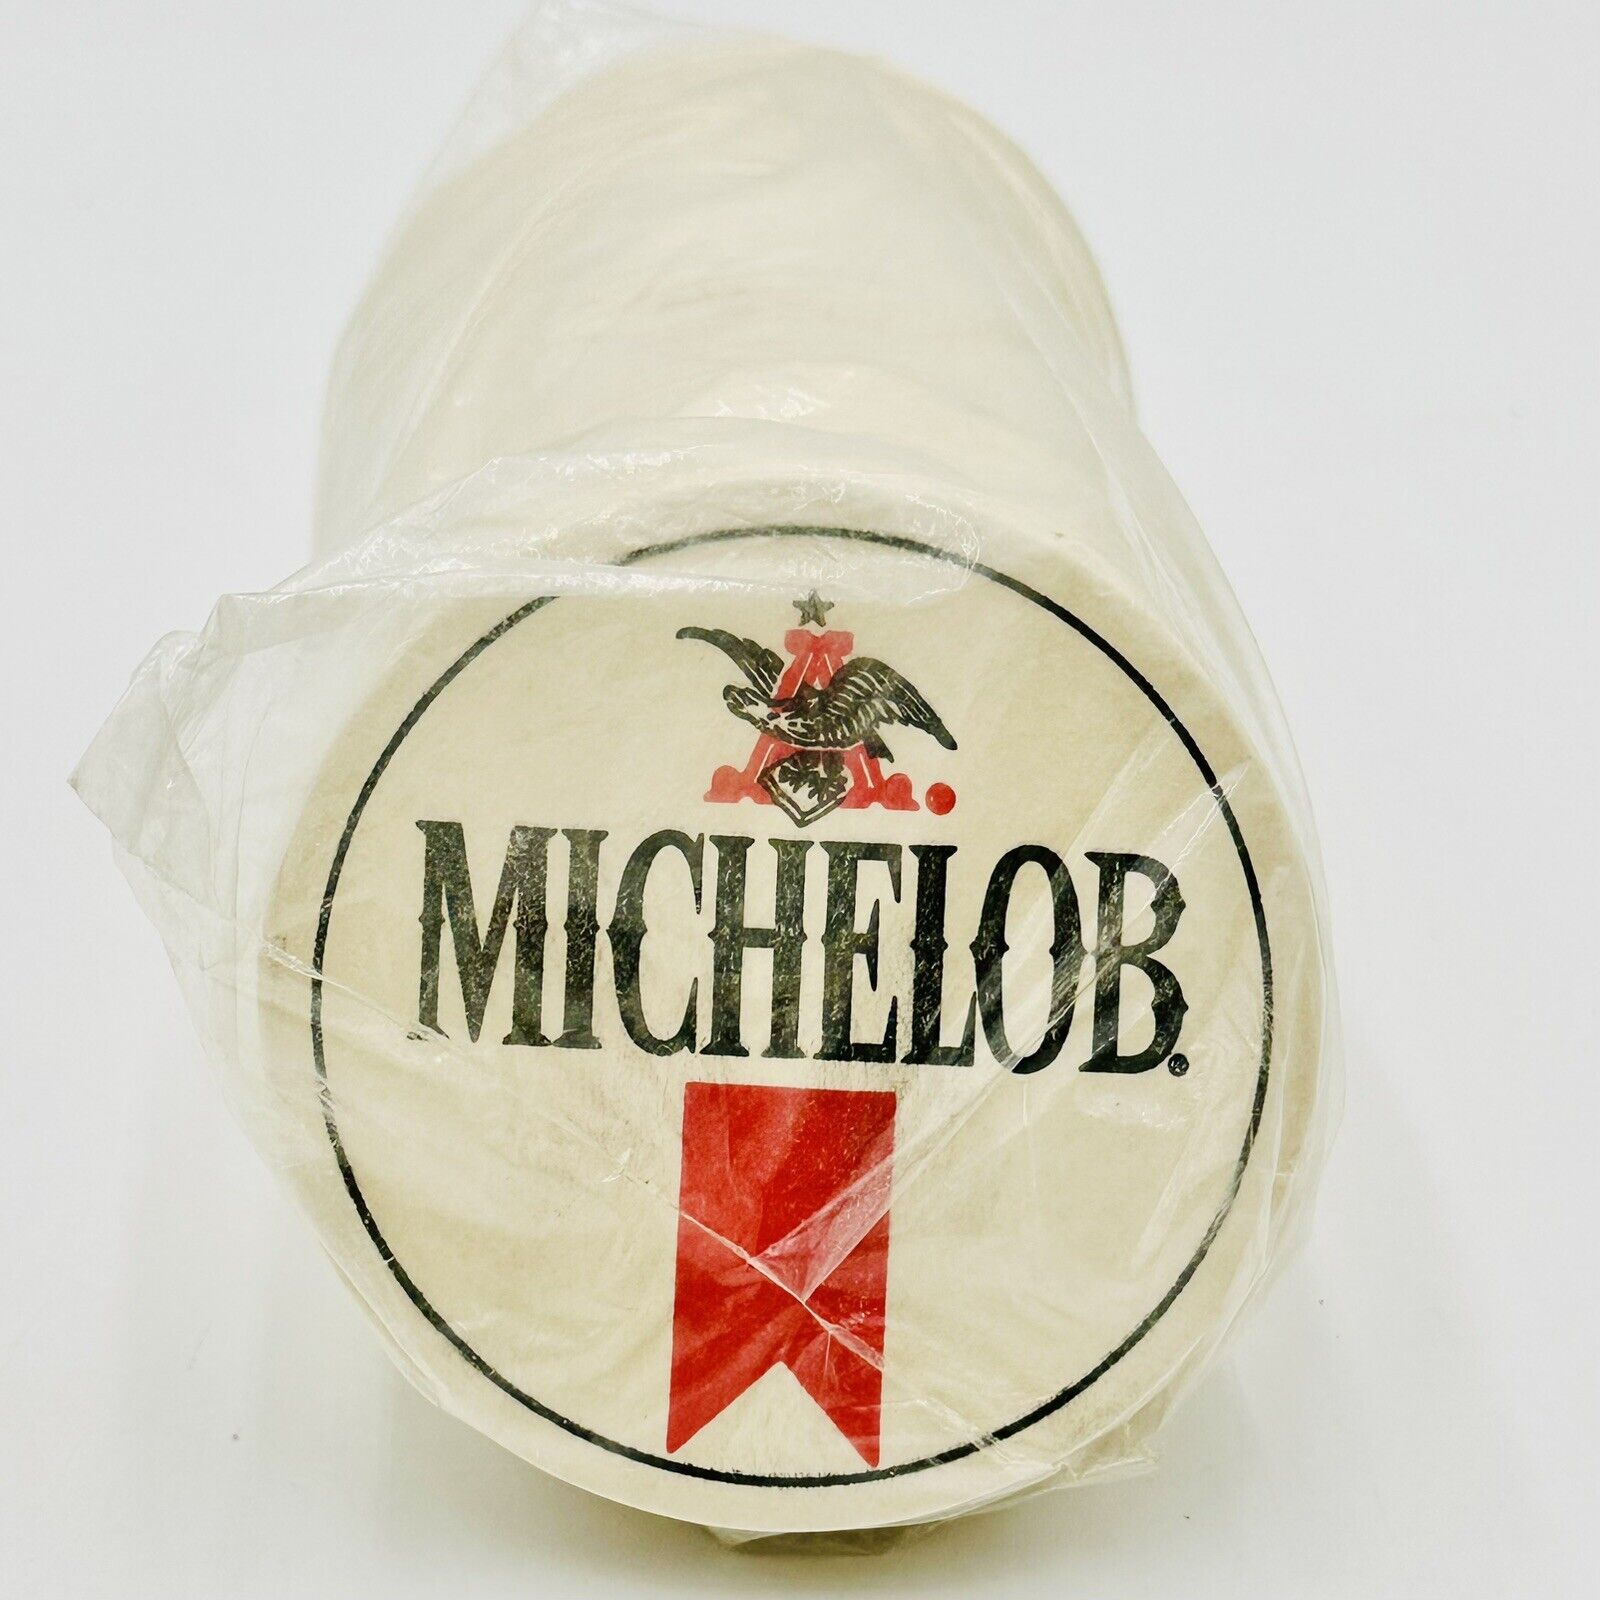 Vtg Full Sleeve Michelob Double Sided Cardboard Beer Coasters - New Old Stock